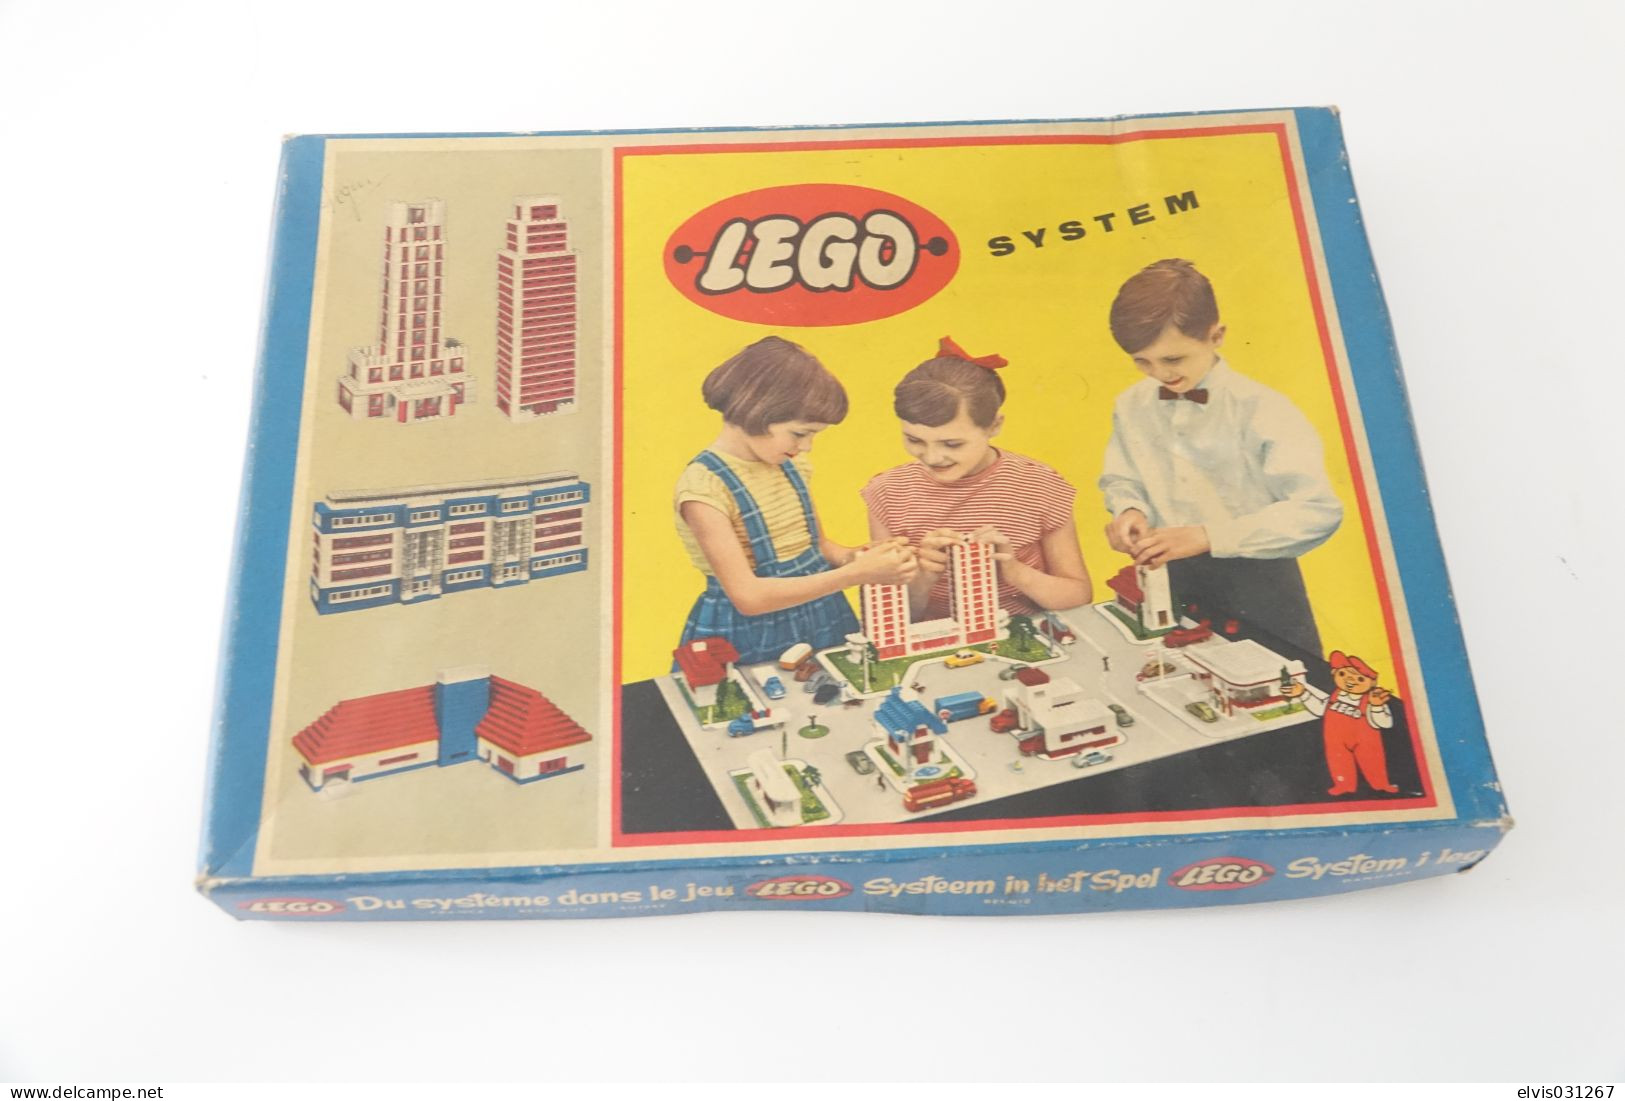 LEGO - 700/3a Gift Package (Lego Mursten) Extremely Rare BOX ONLY - Collector Item - Original Lego 1954 - Vintage - Catalogs